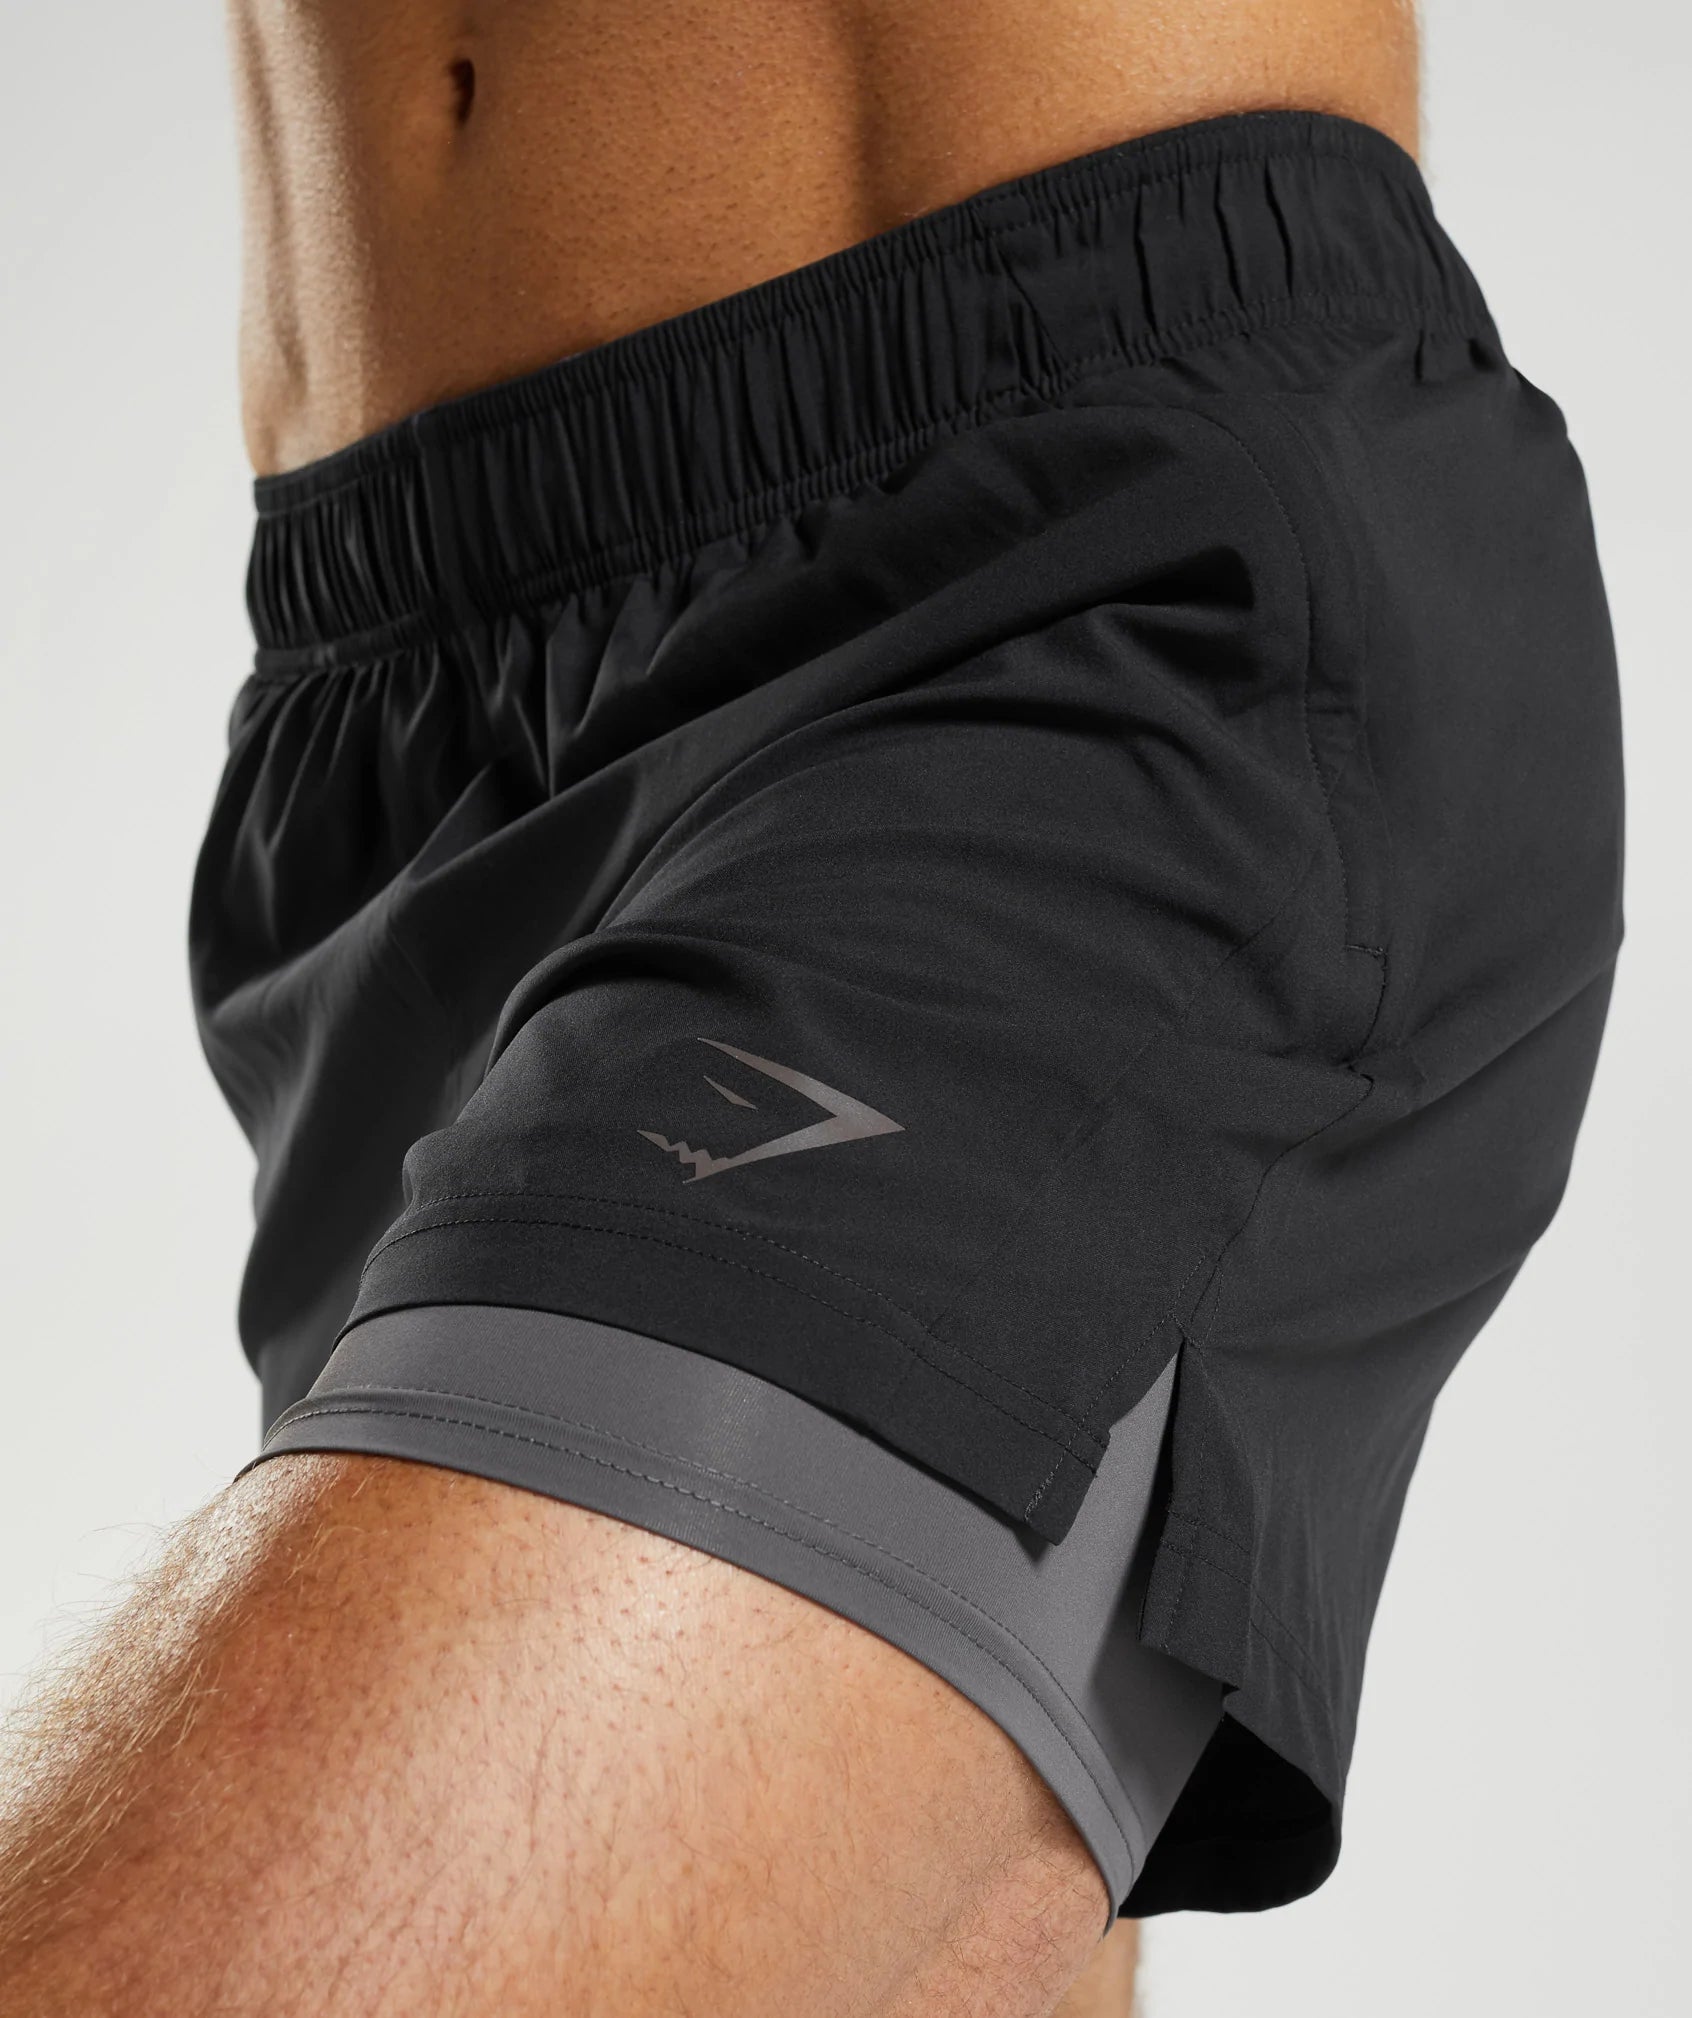 Sport 5" 2 In 1 Shorts in Black/Silhouette Grey - view 5